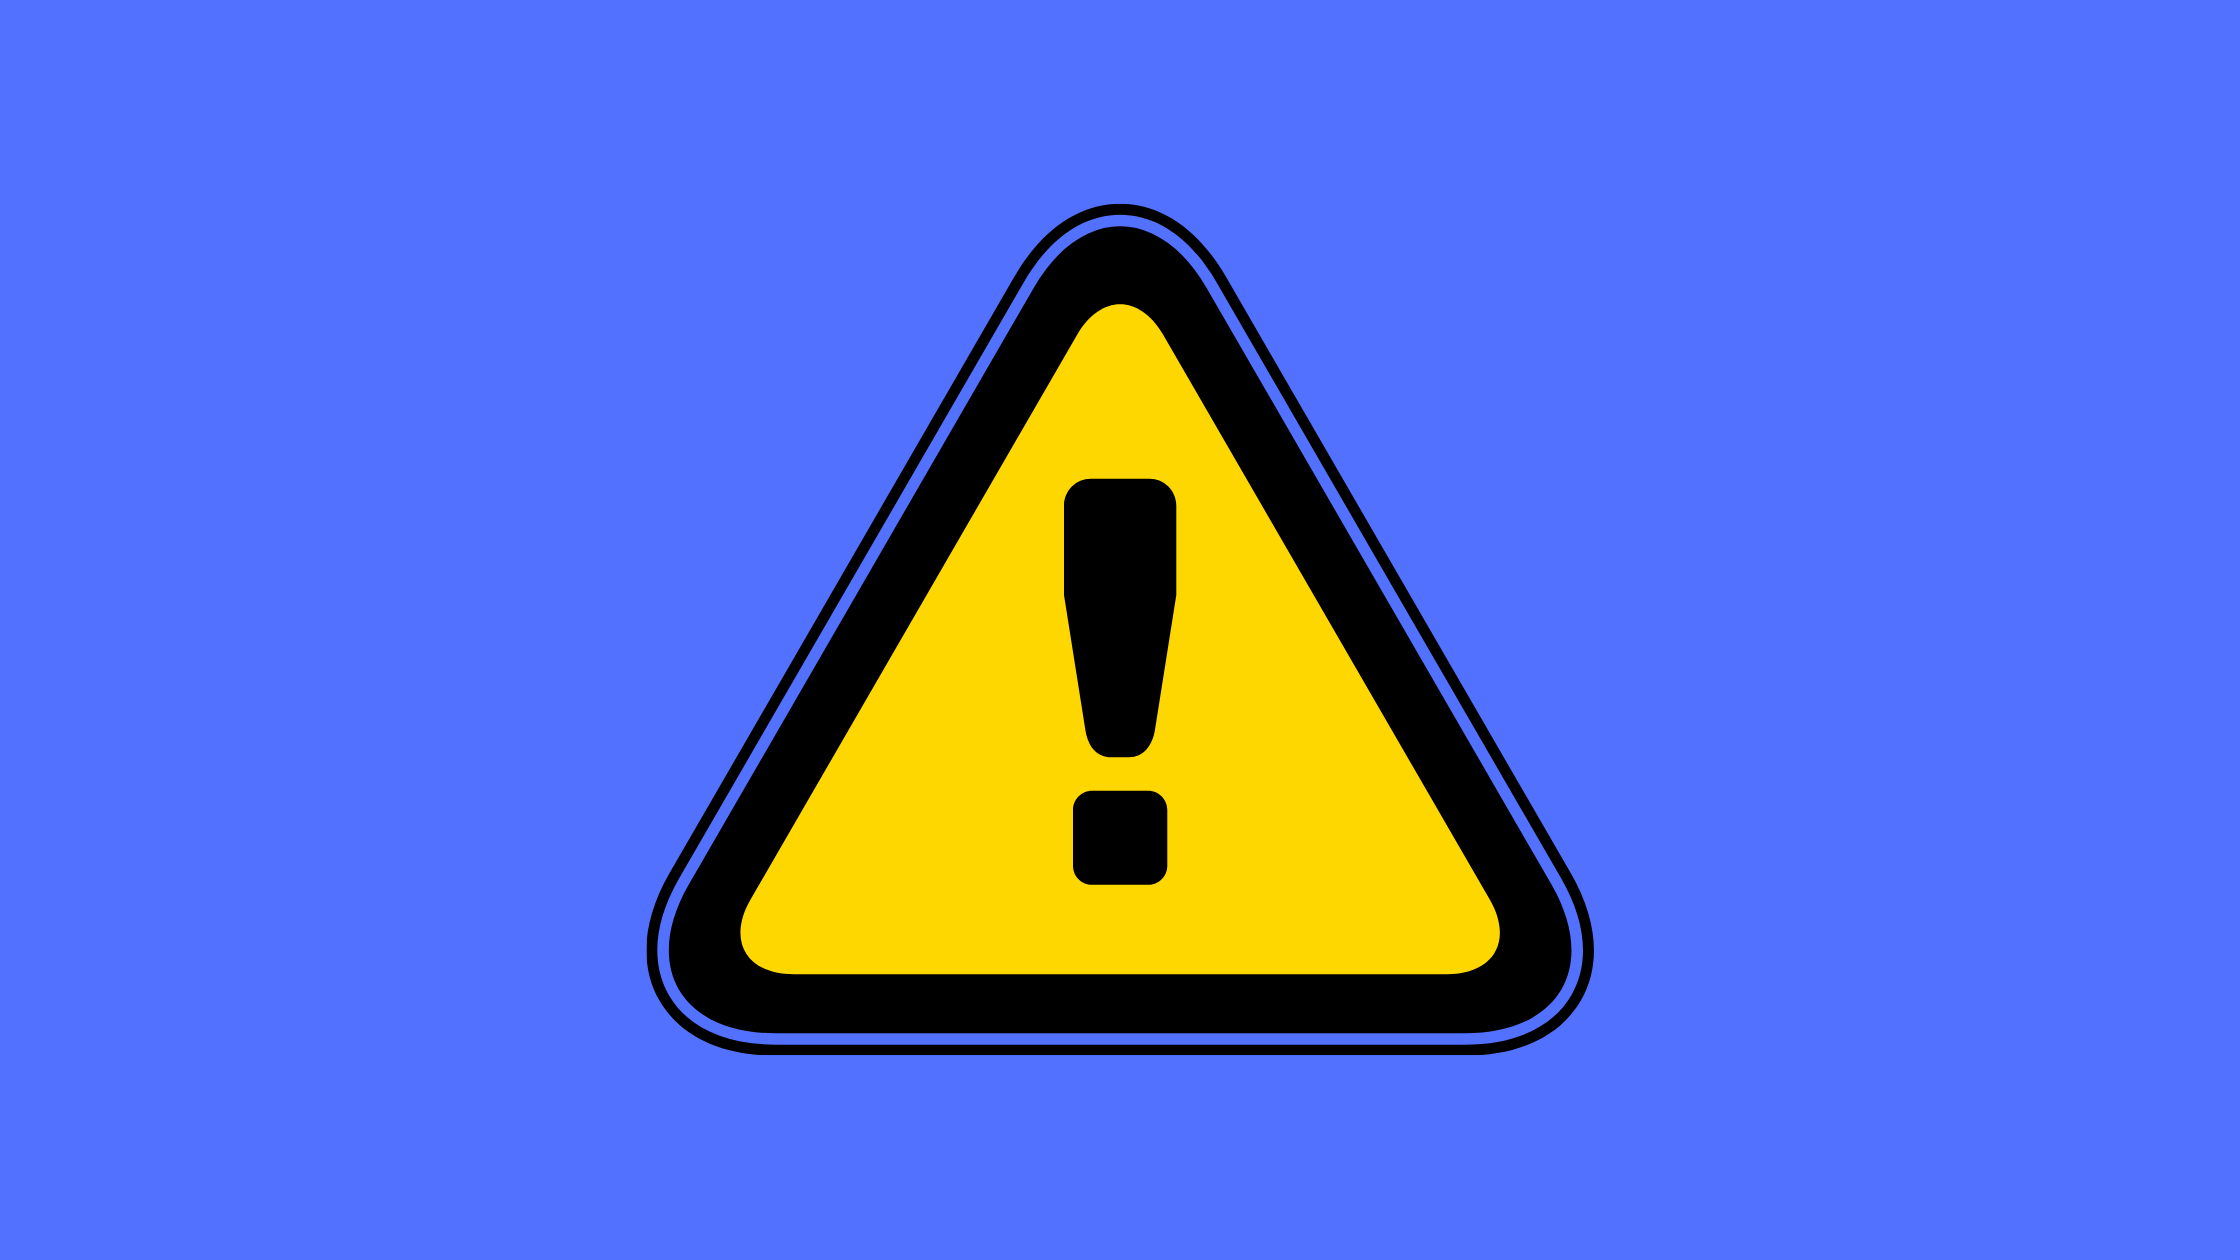 Hazard Sign Yellow Triangle with Black Exclamation Mark